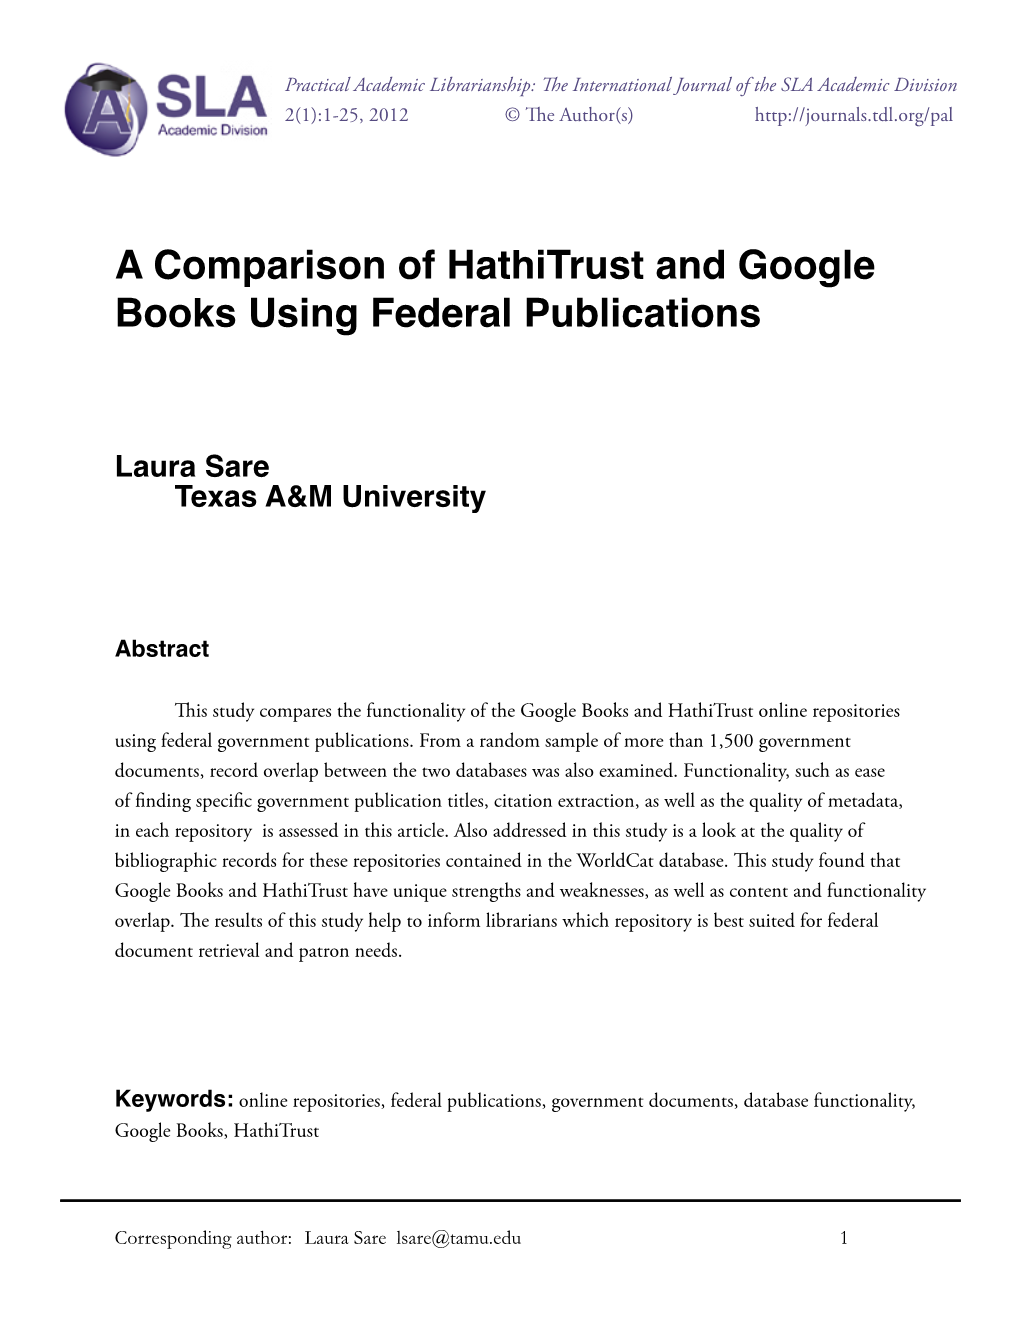 A Comparison of Hathitrust and Google Books Using Federal Publications